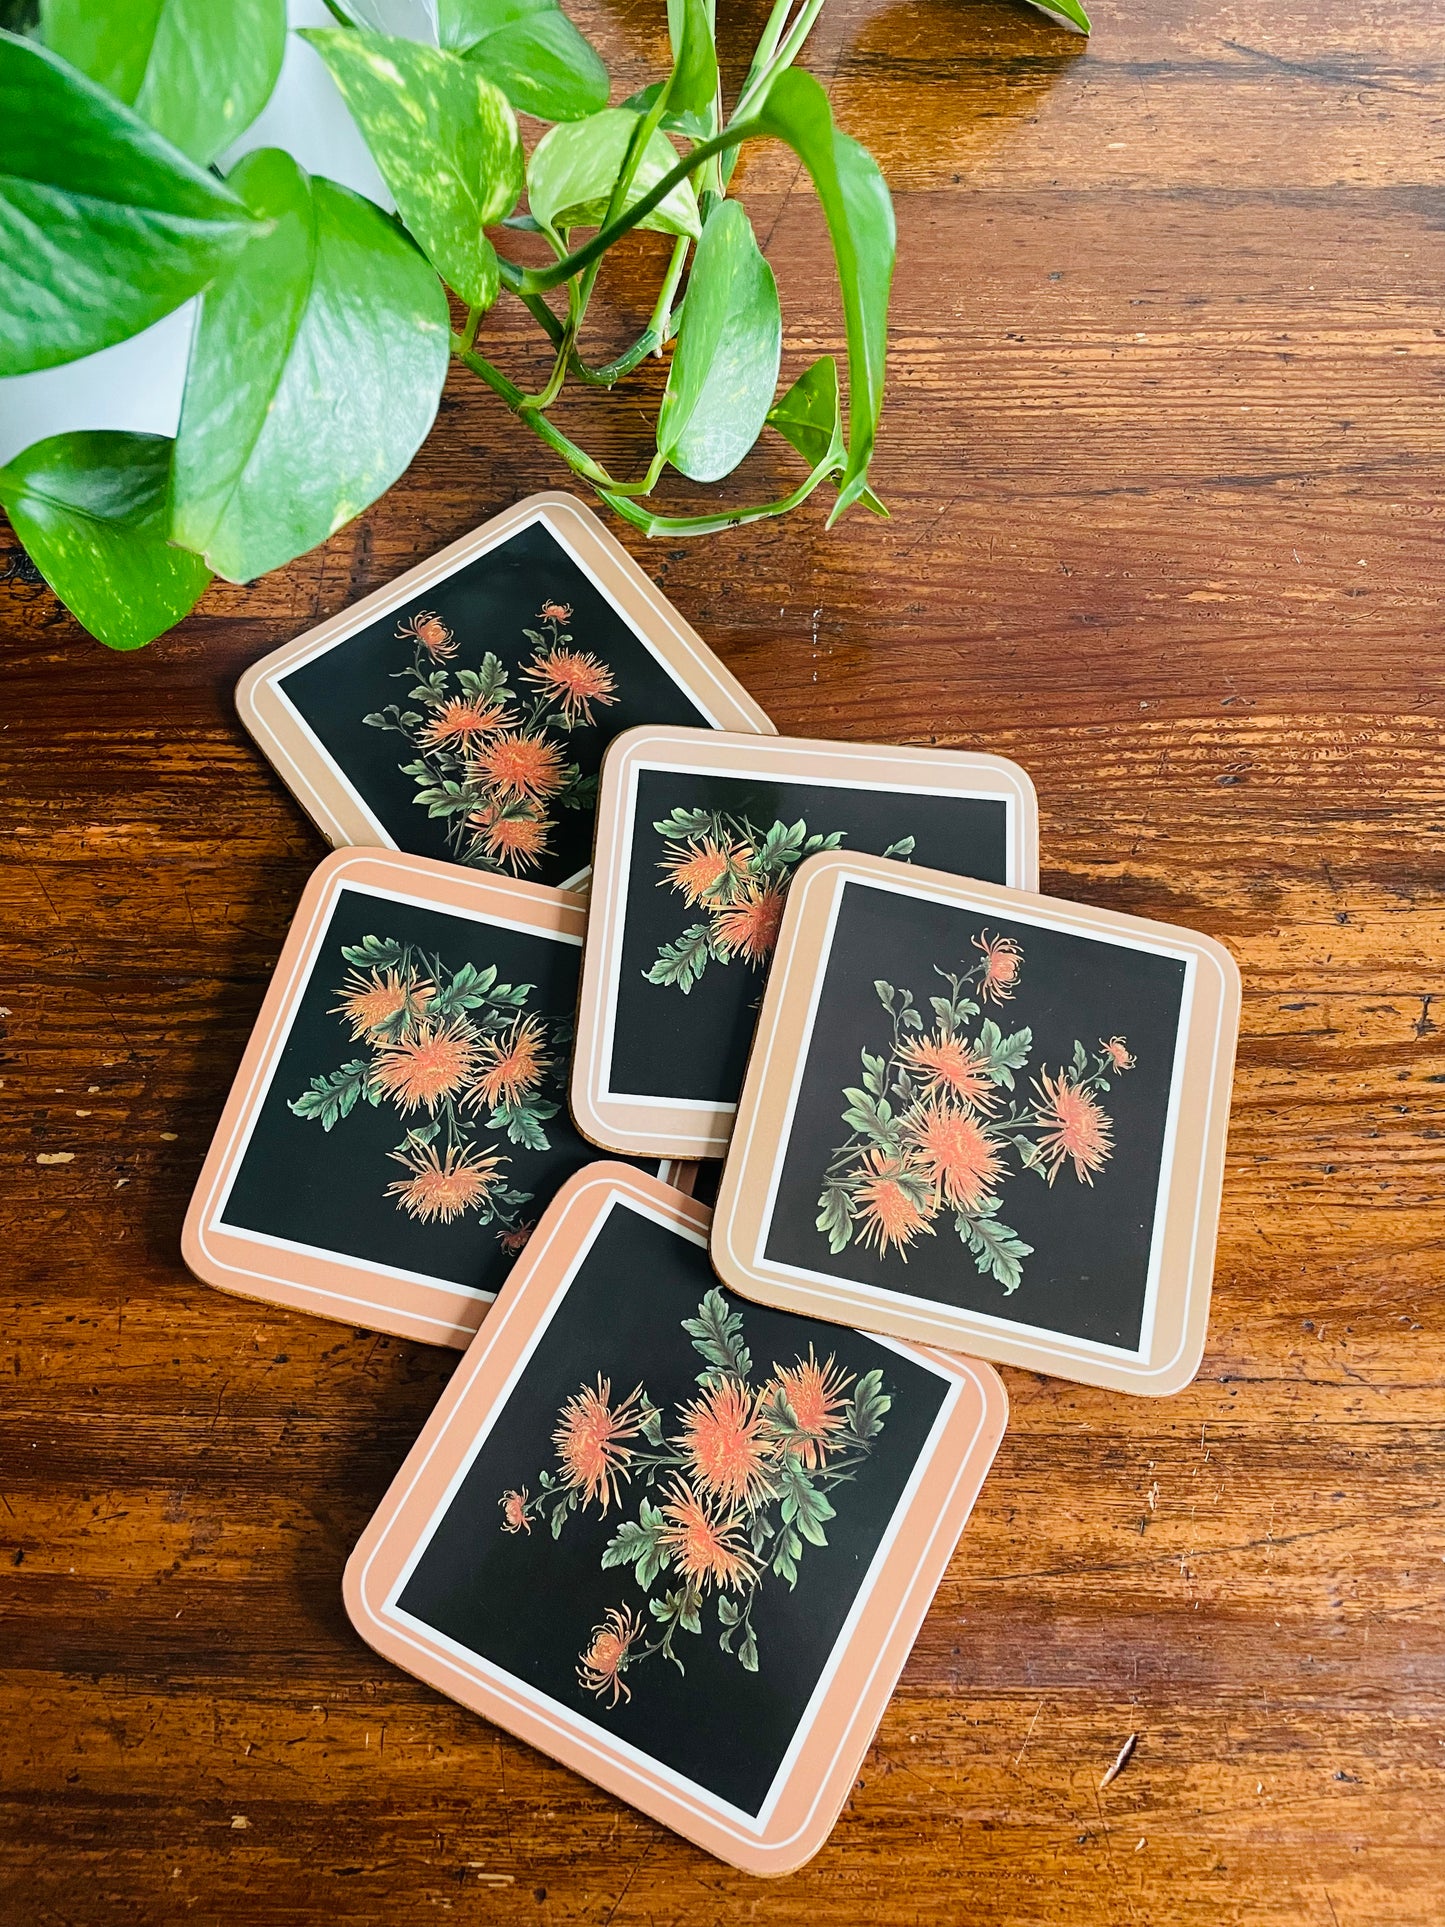 Pimpernel Floral Coasters with Cork Backing - Set of 5 - #2